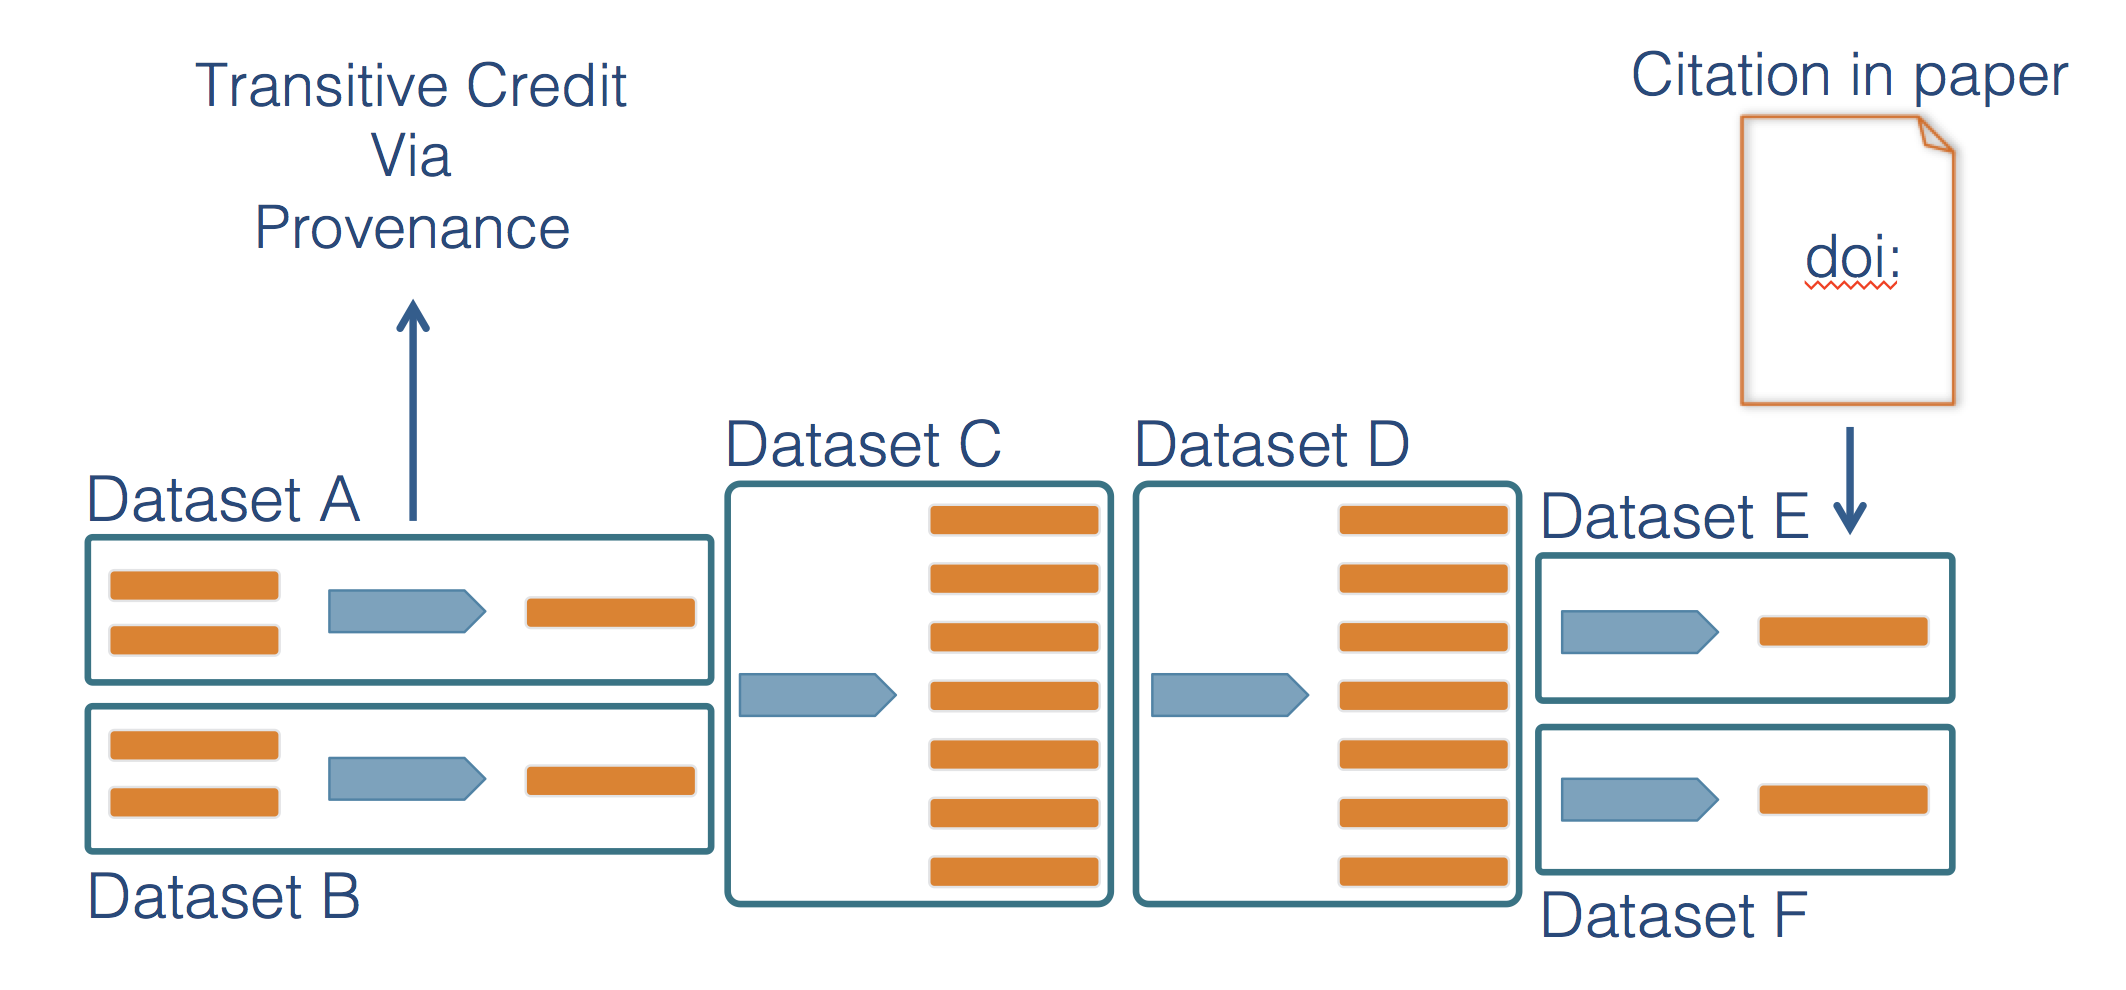 Scientific workflows provenance allows credit to be assigned to precursor data and analytical work.